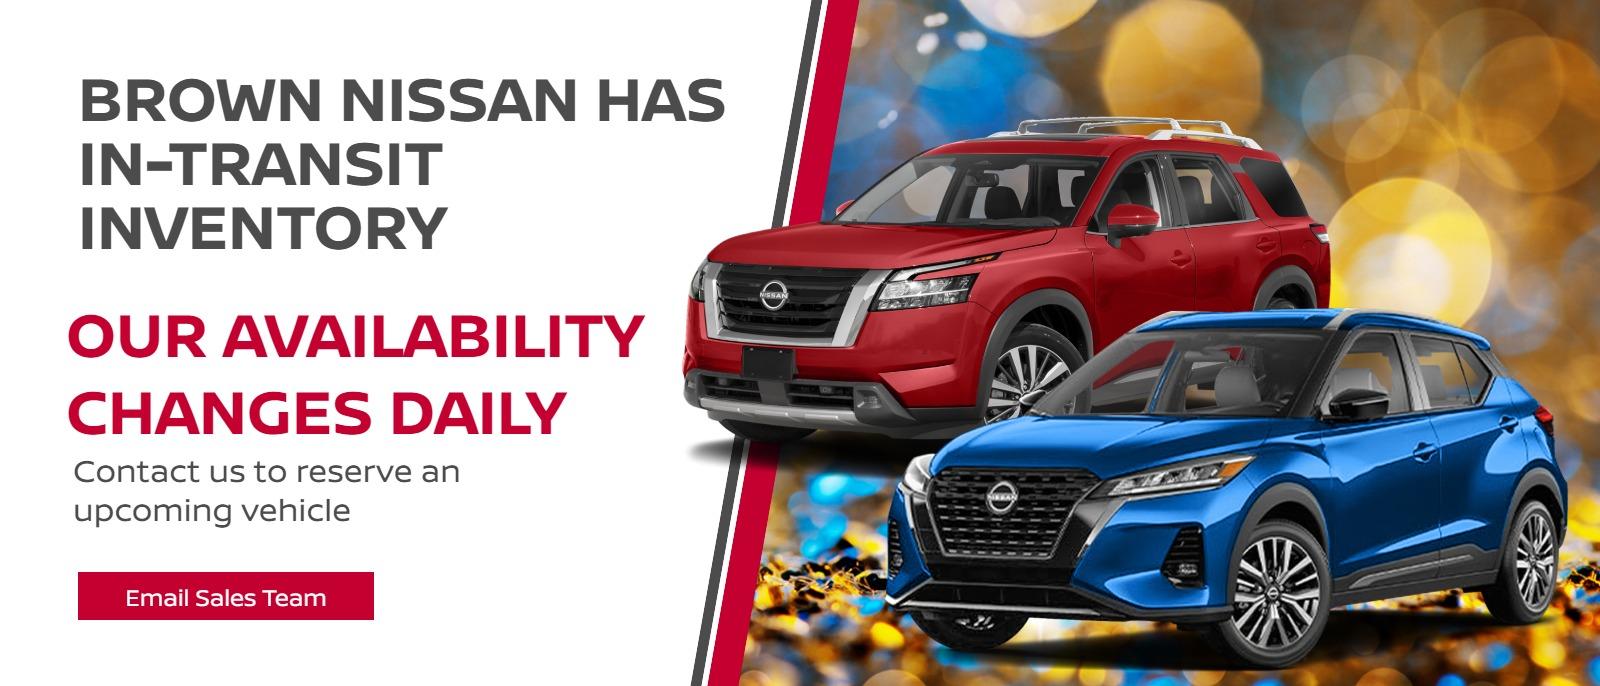 BROWN NISSAN HAS IN-TRANSIT INVENTORY
Our availability changes daily
Contact us to reserve an upcoming vehicle